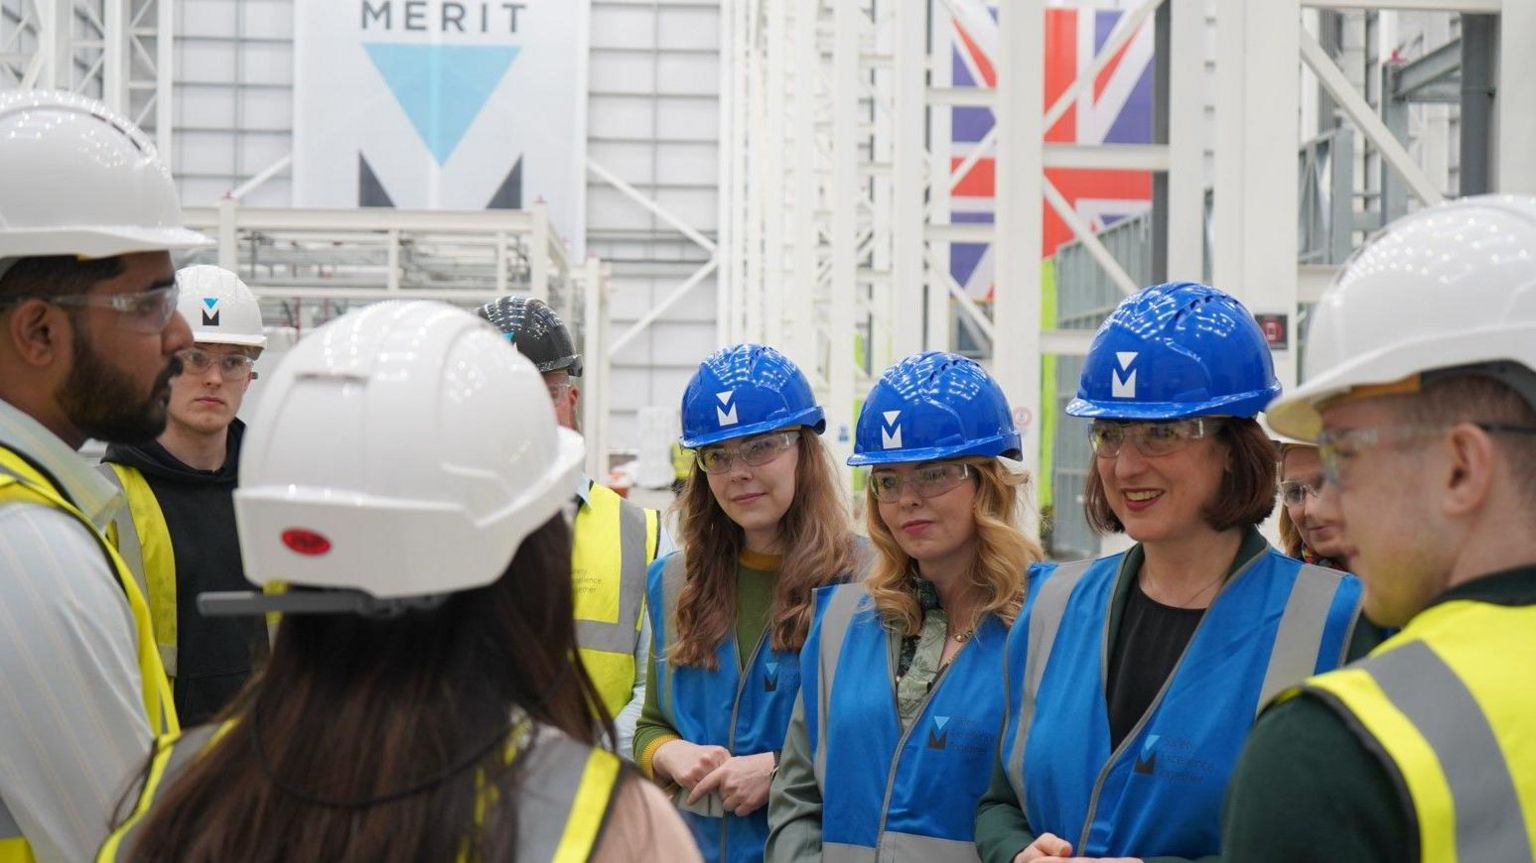 Shadow Chancellor Rachel Reeves on a visit to the Merit factory in Cramlington